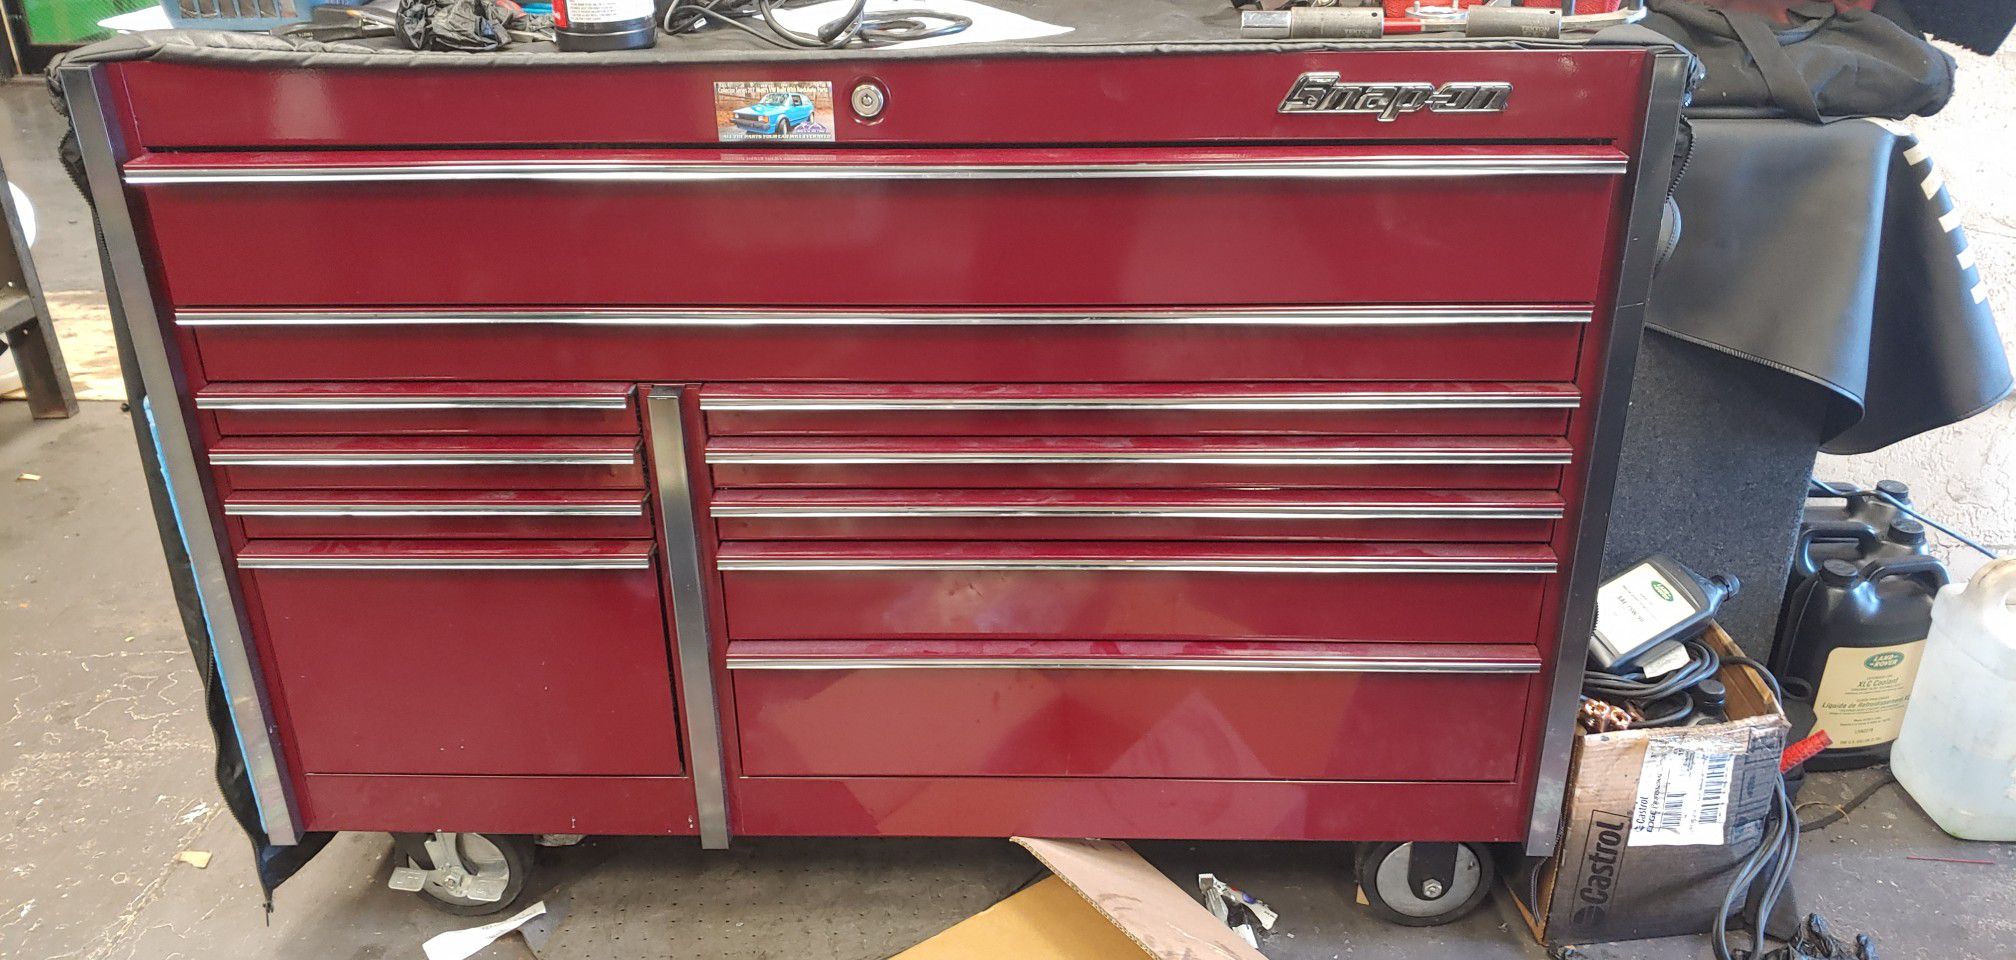 Snap on tool box almost new